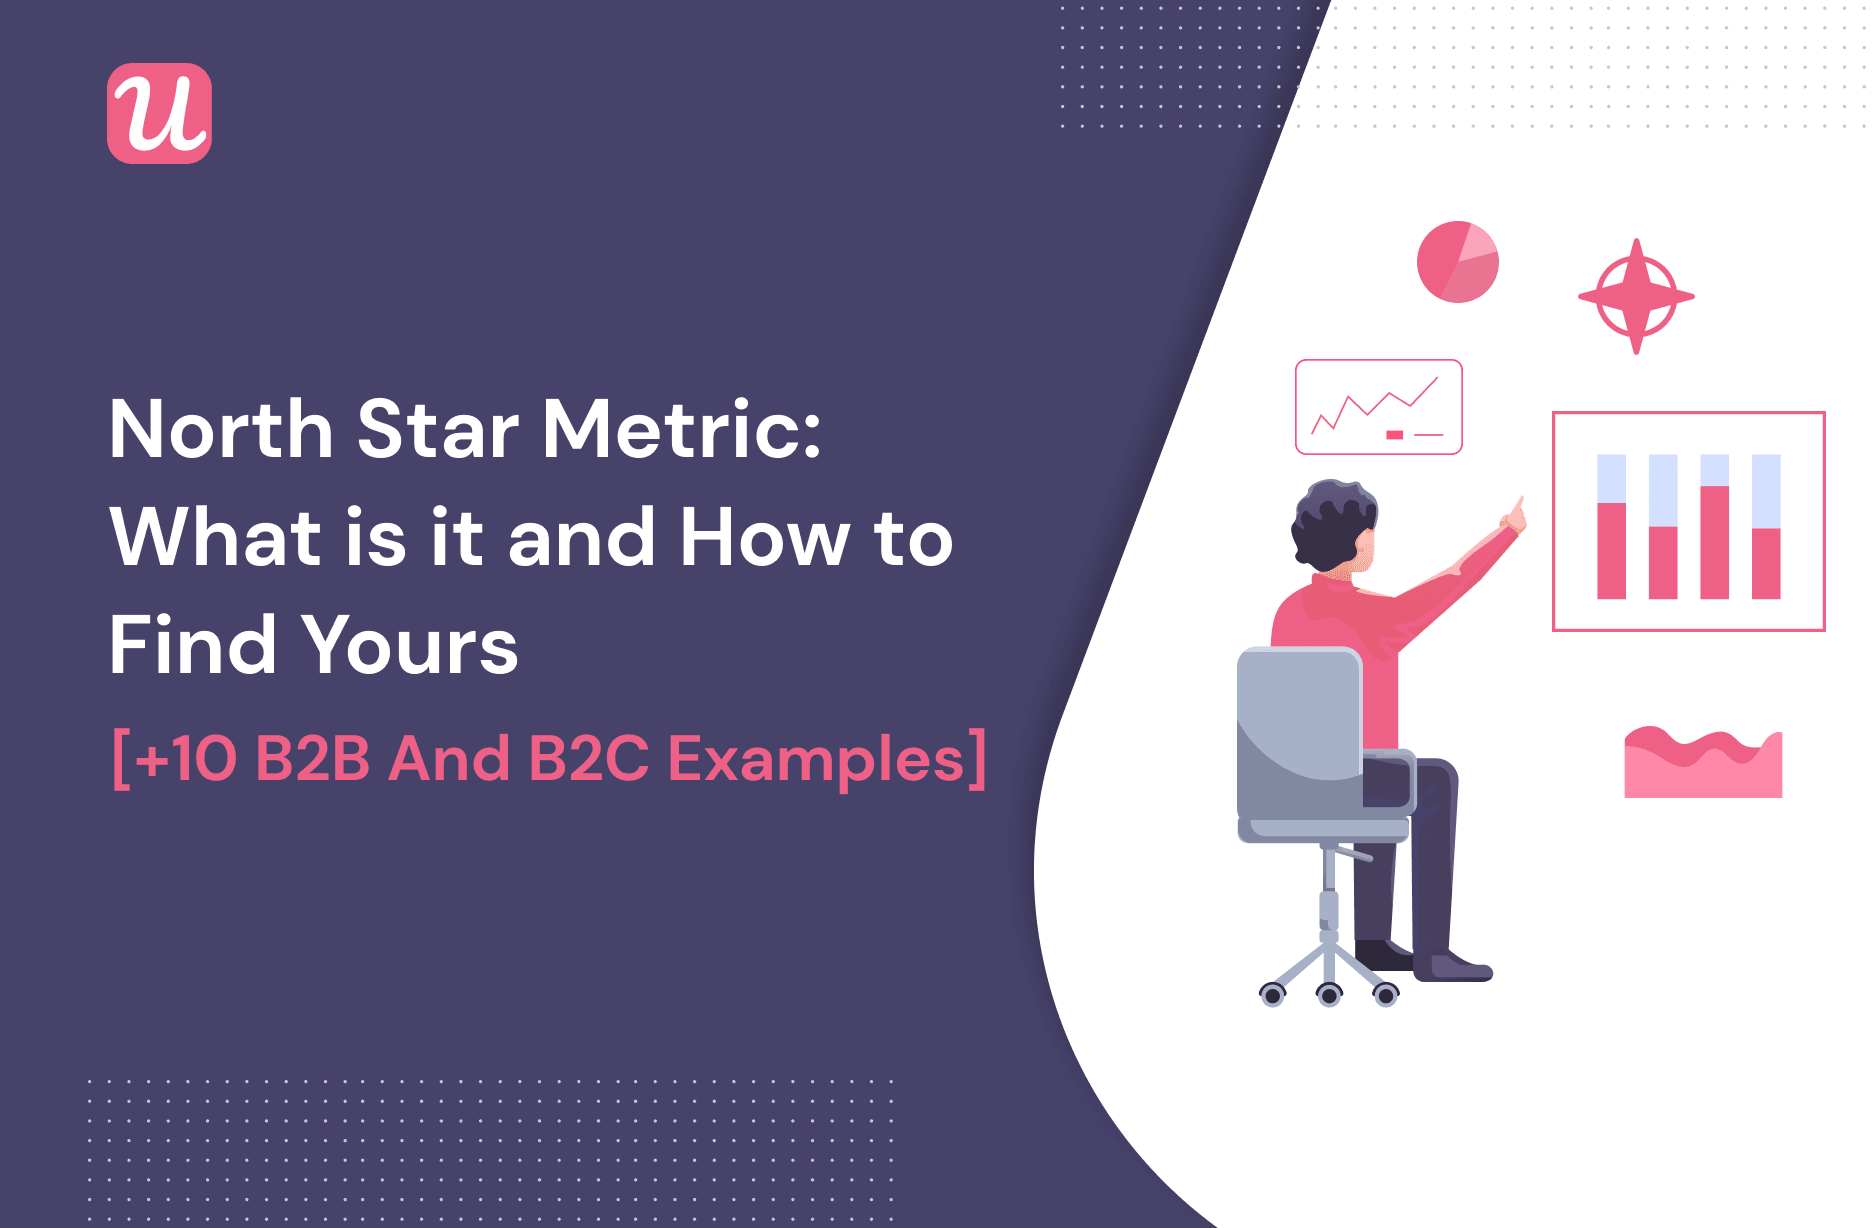 North Star Metric: What Is It And How to Find Yours [+10 B2B and B2C examples]